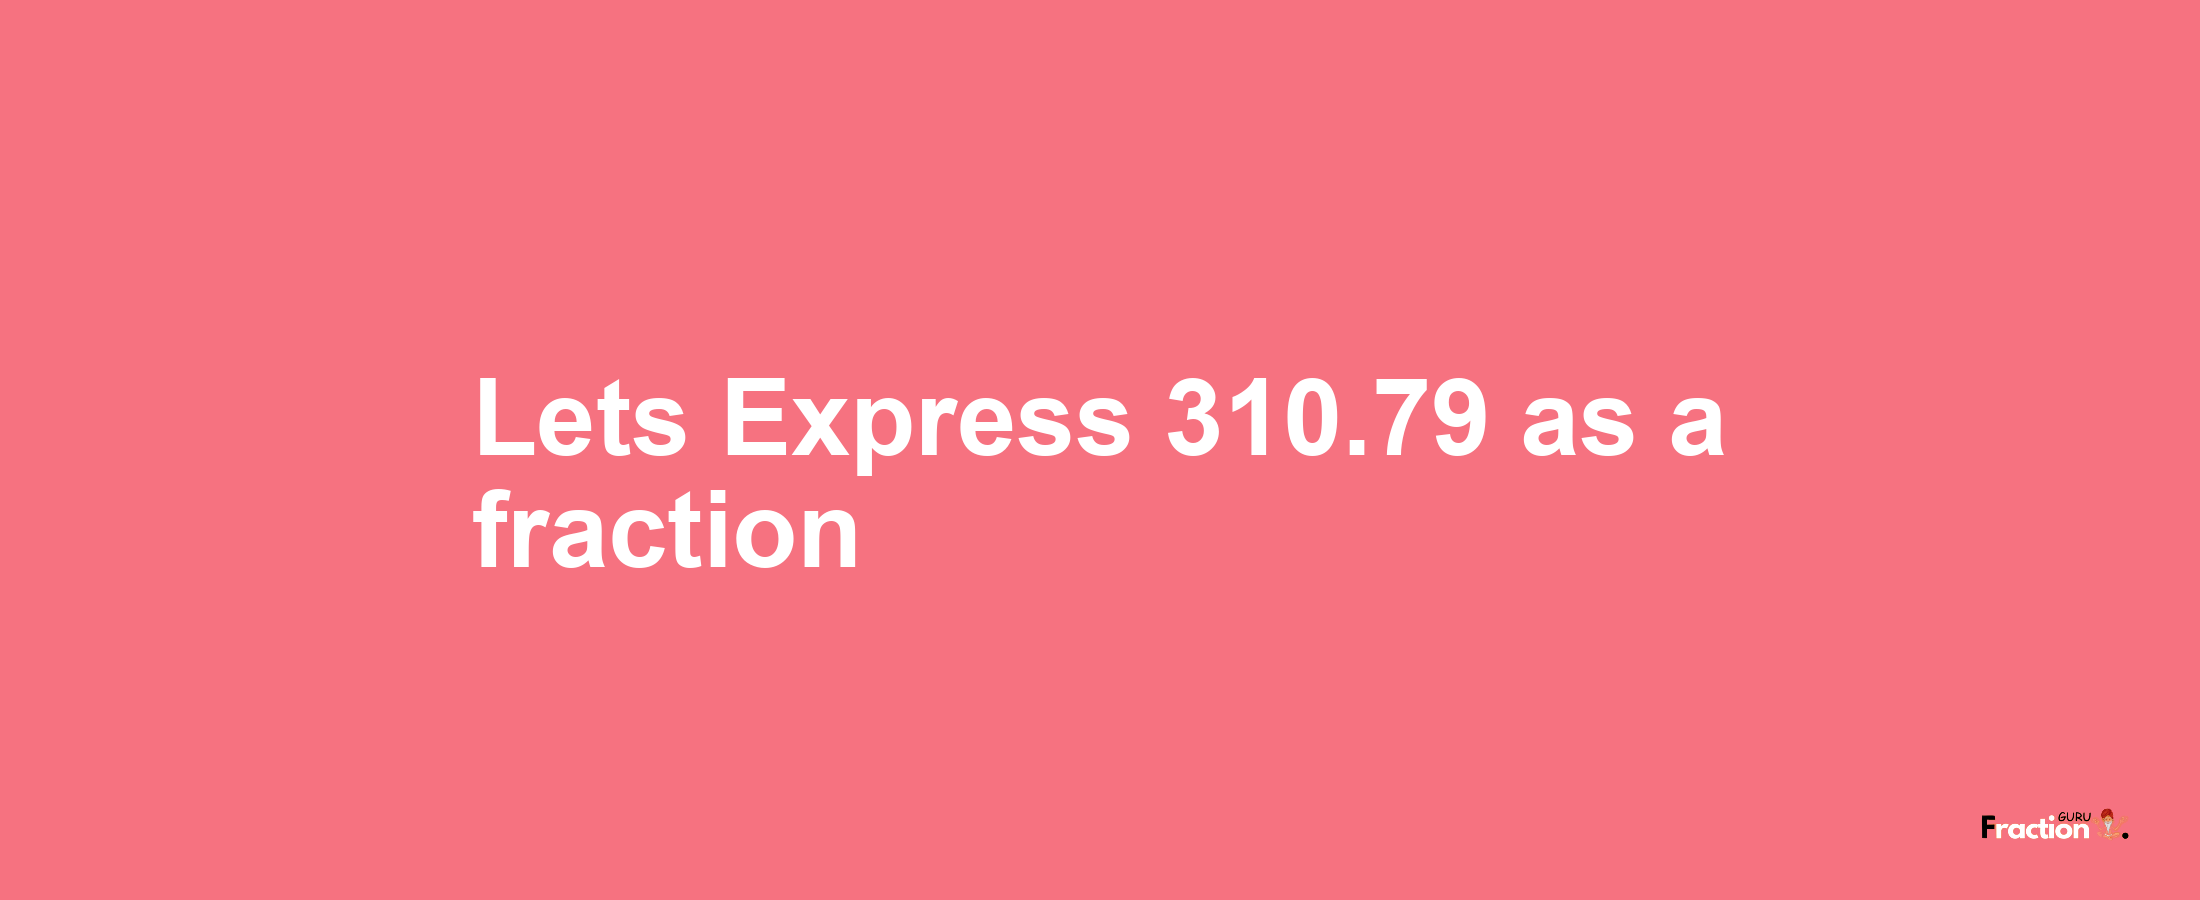 Lets Express 310.79 as afraction